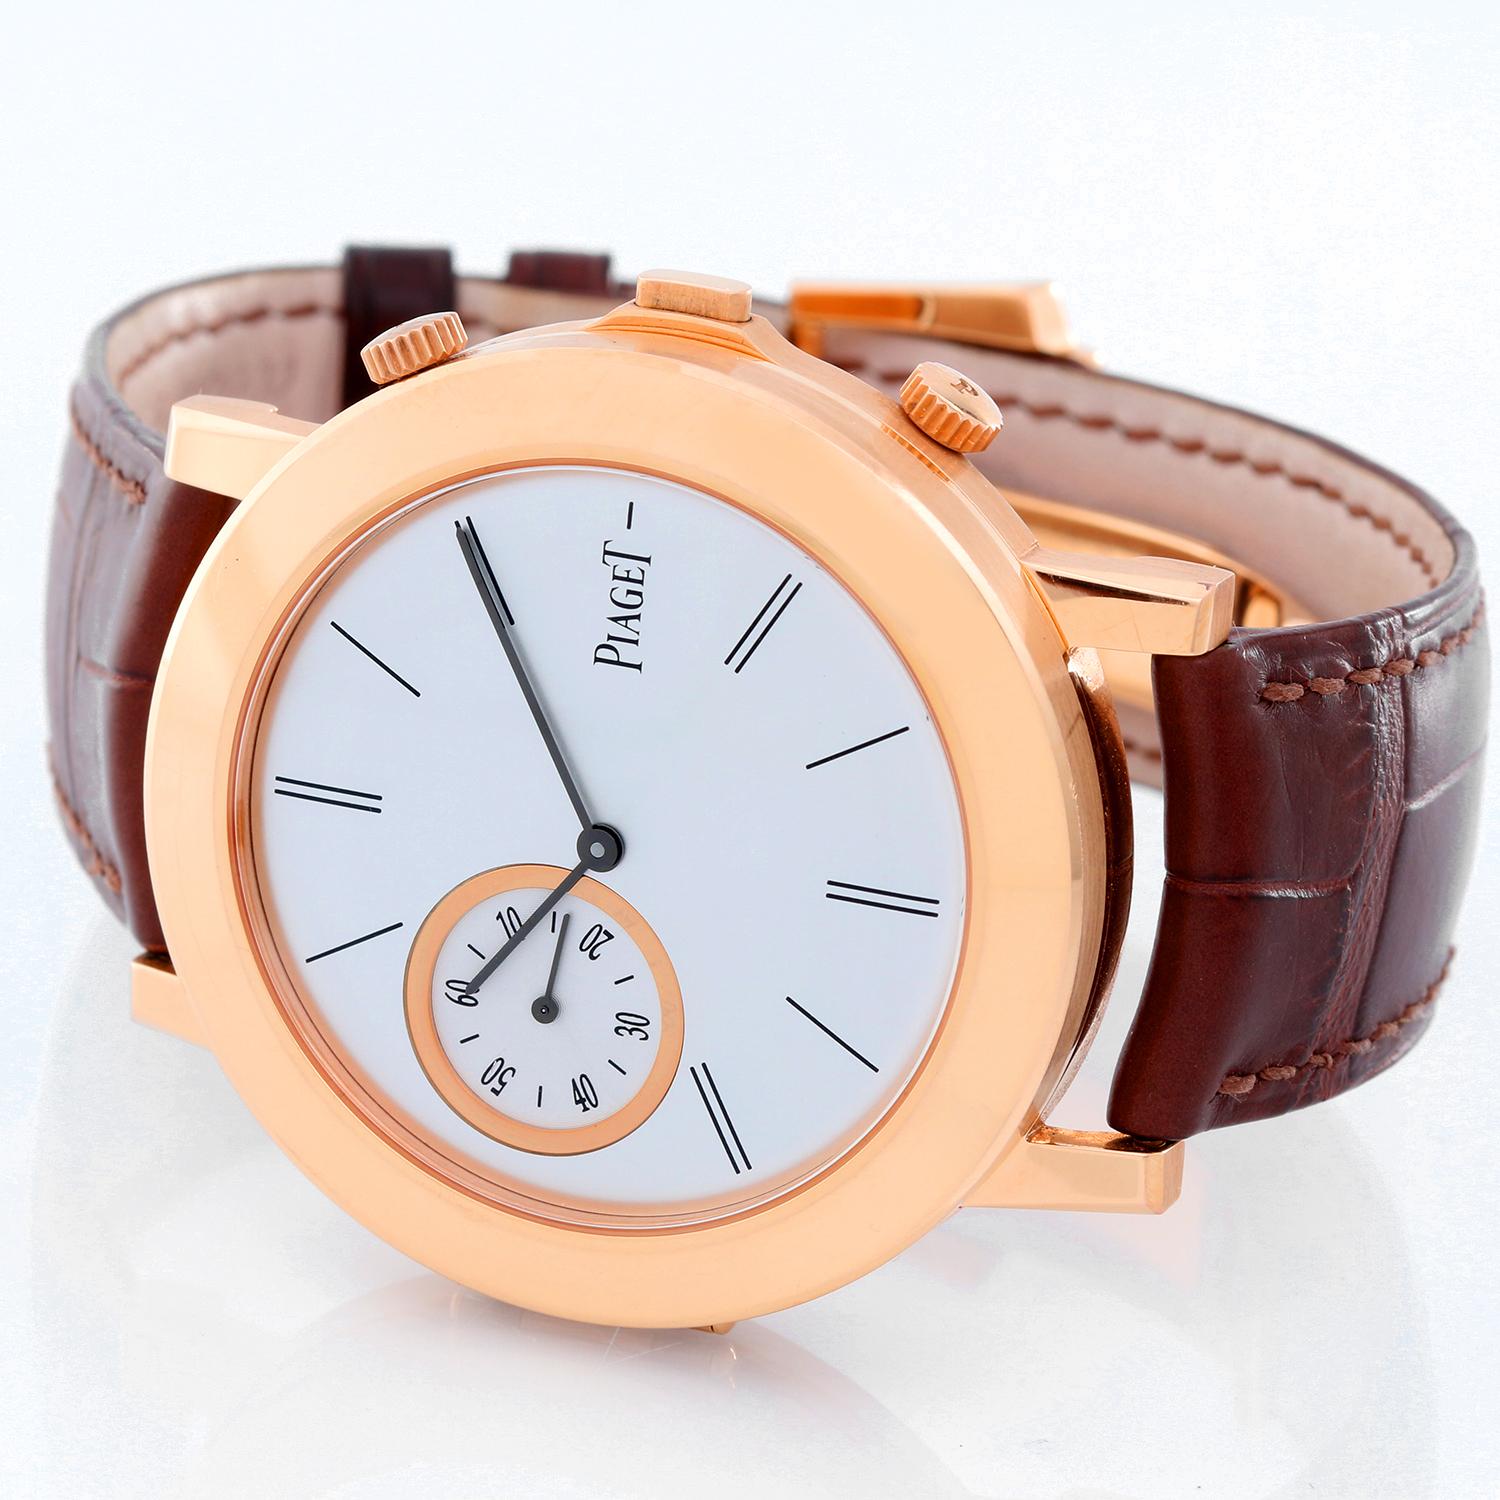 Piaget Altiplano Double Jeu  18k Rose Gold Men's Watch GOA3515 -  Piaget Caliber 838P ultra-thin hand-wound mechanical movement with small seconds and with 24-hour display. 18k Rose Gold round style case with exposition back (43mm dia.).  Note: 